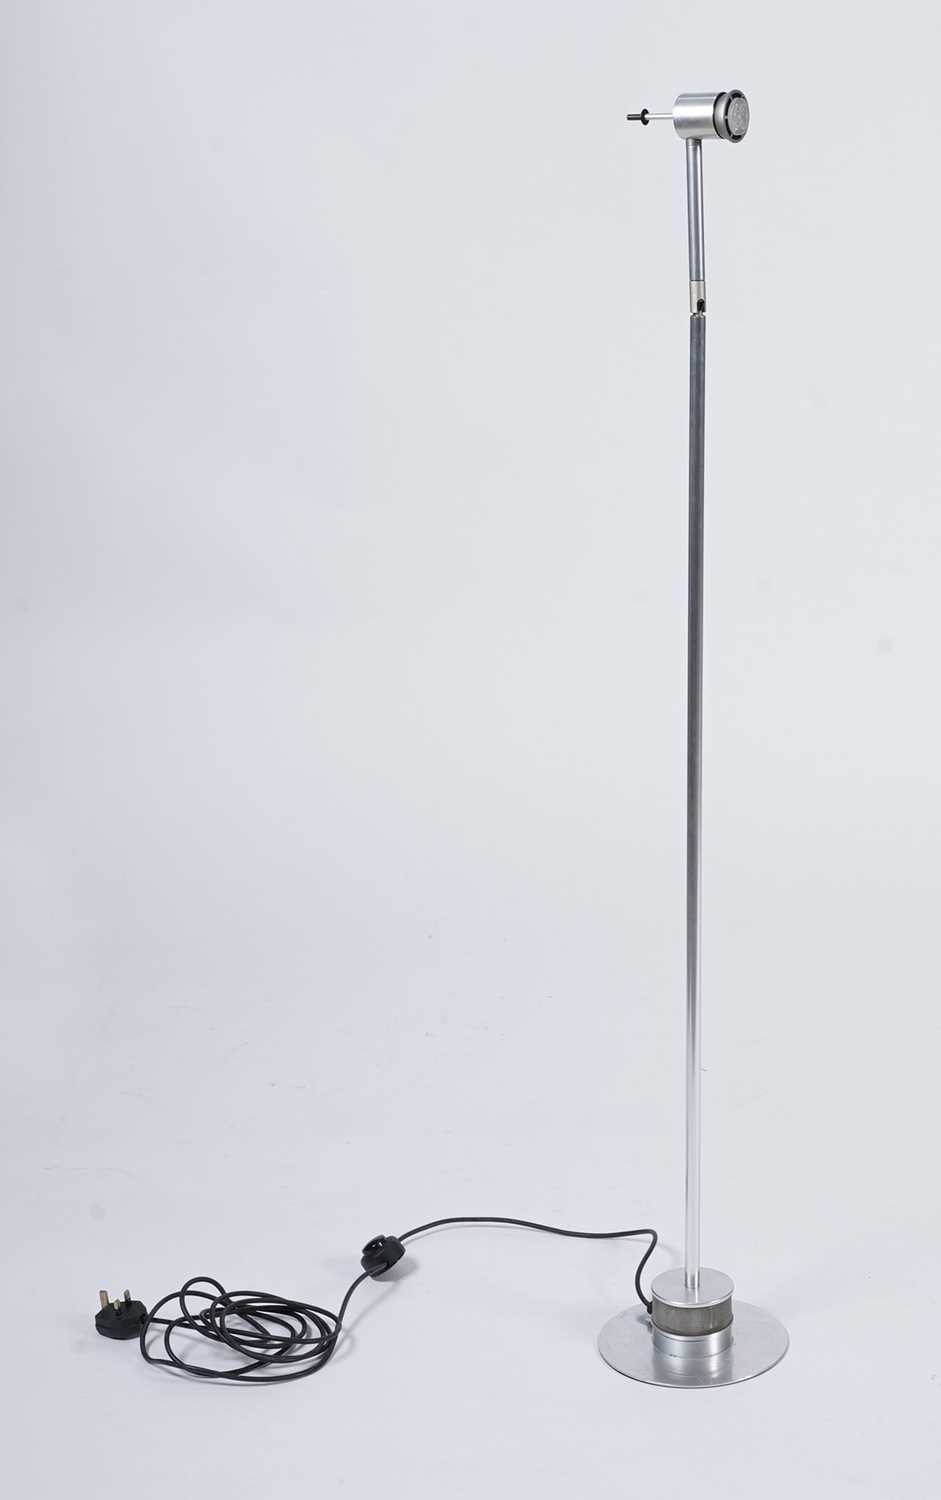 Peter Nelson for architectural lighting: A model 206 floor lamp - Image 2 of 5